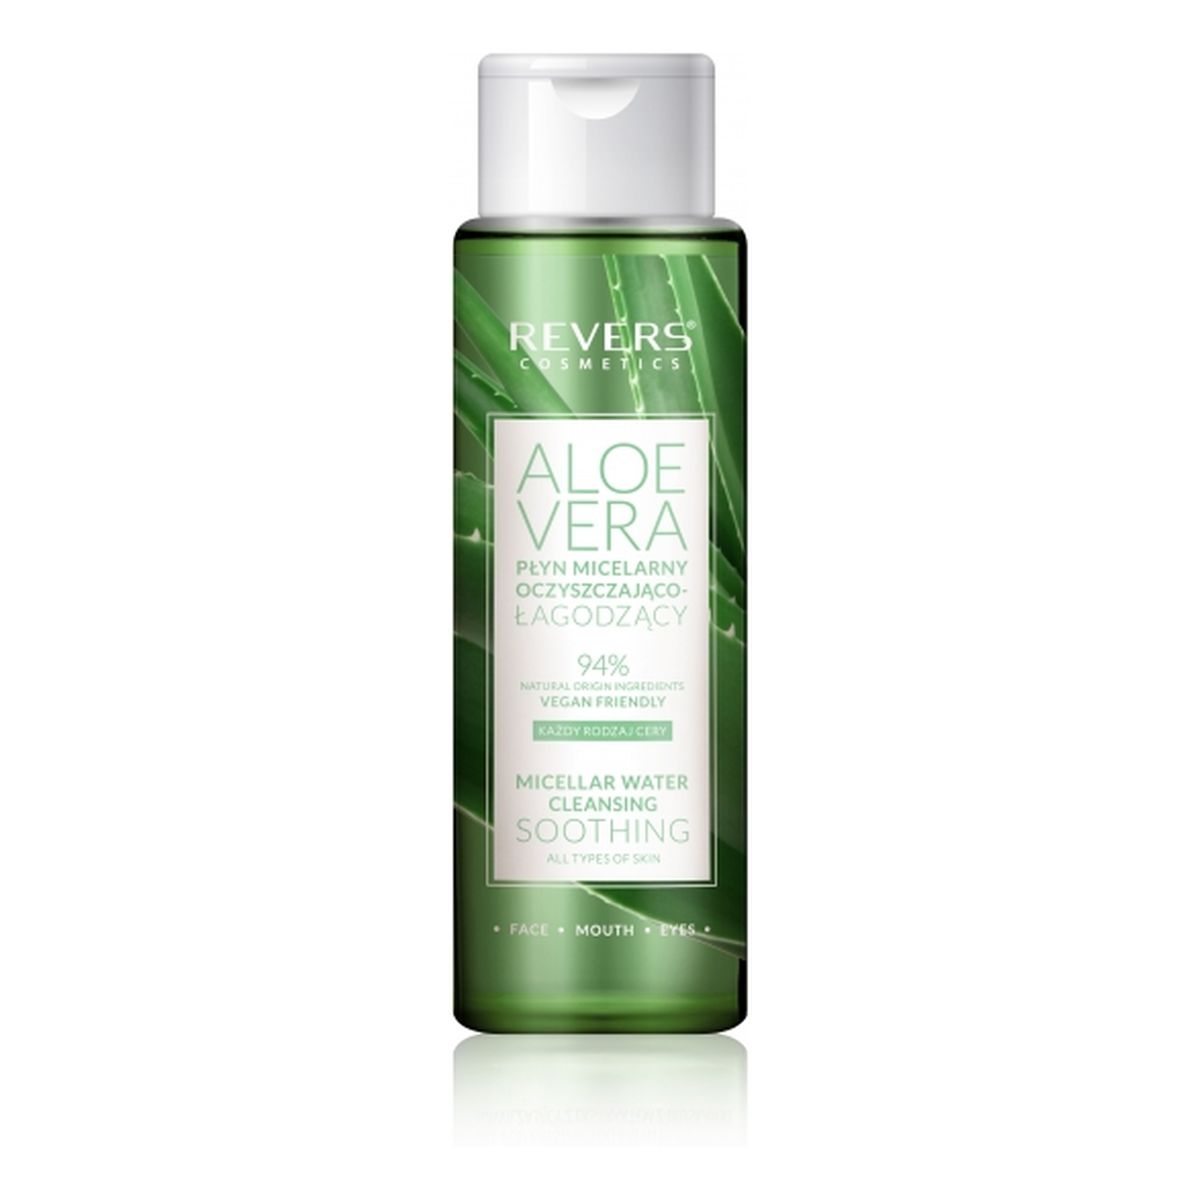 Revers Cleansing and Soothing Micellar Lotion Płyn Micelarny 400ml